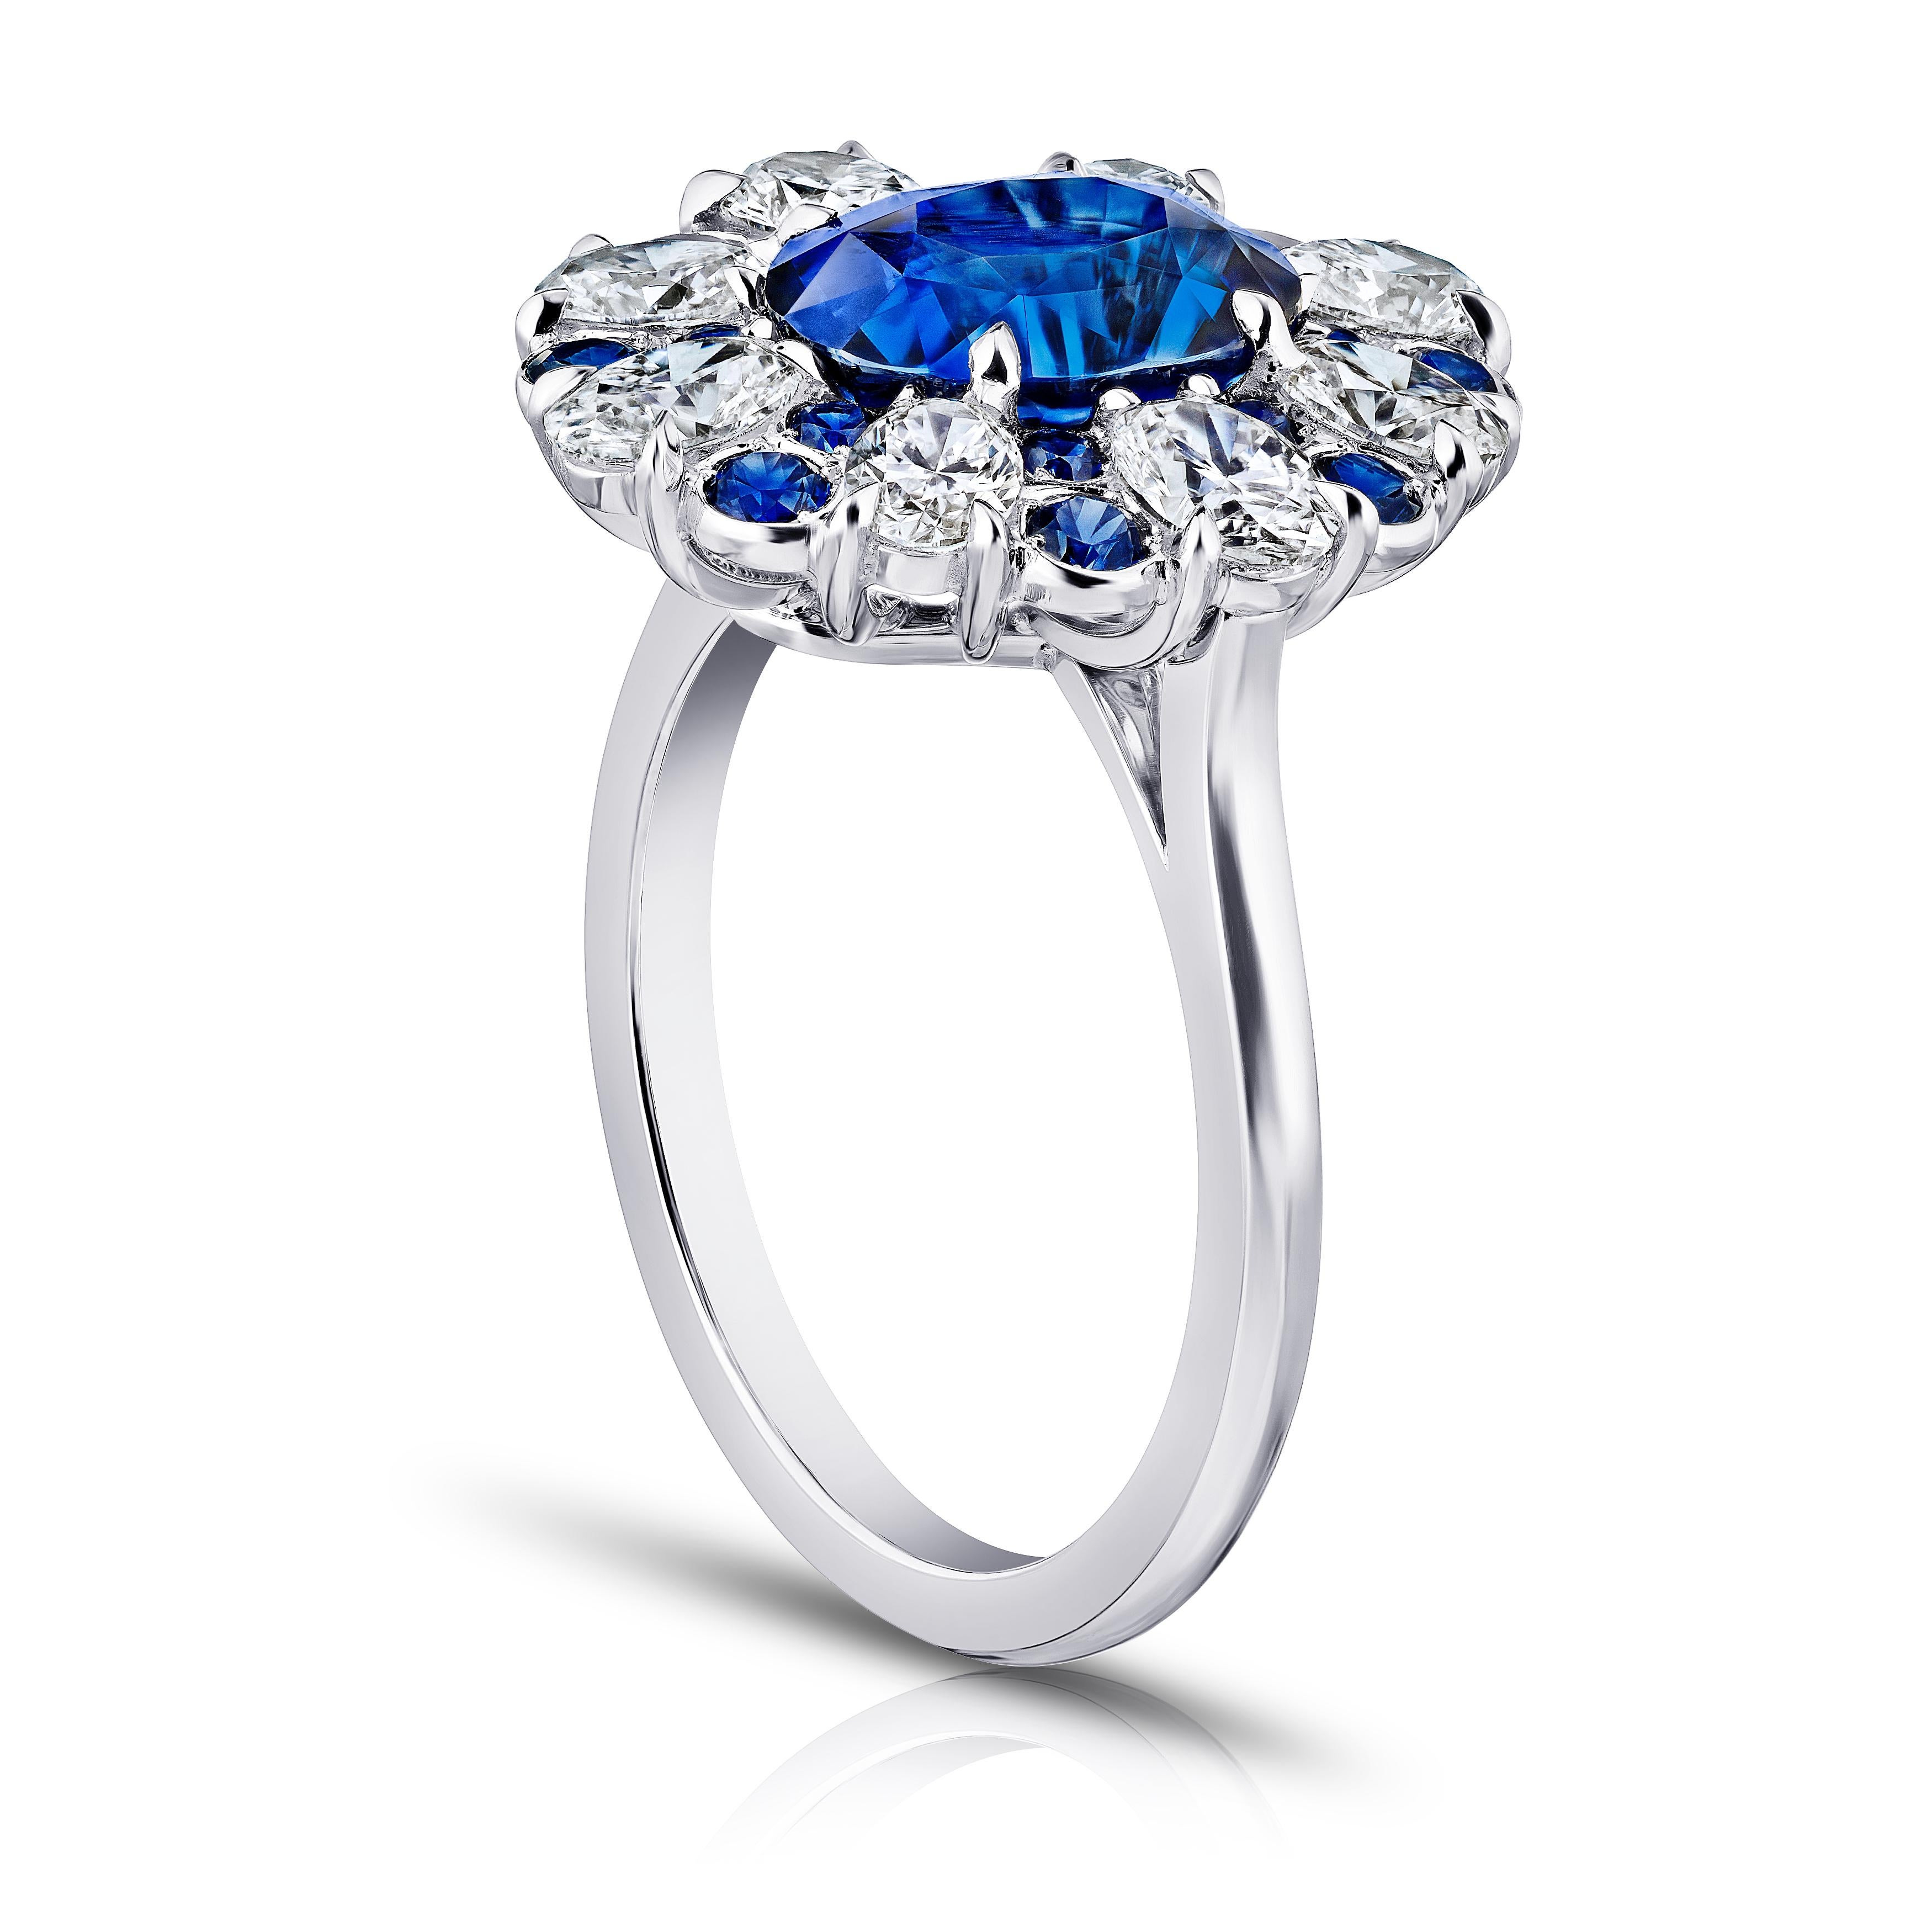 3.11 carat oval blue sapphire with eight oval diamonds 1.44 carats and 16 round sapphires .54 carats set in a platinum ring.